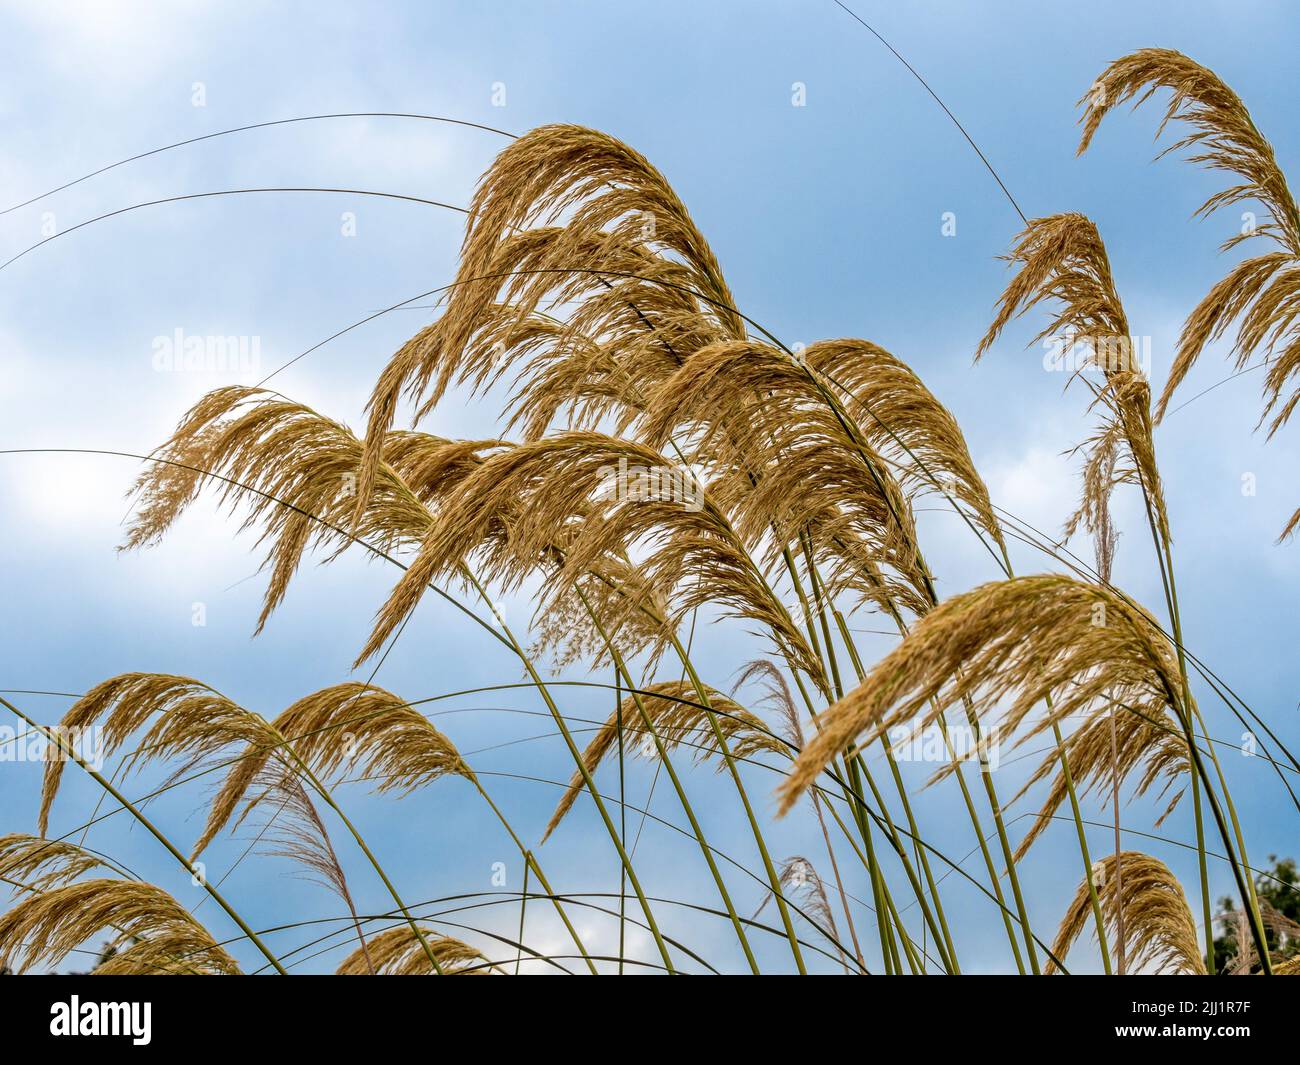 The tall seed heads Cortaderia selloana commonly know as Pampas grass seen against a blue sky Stock Photo